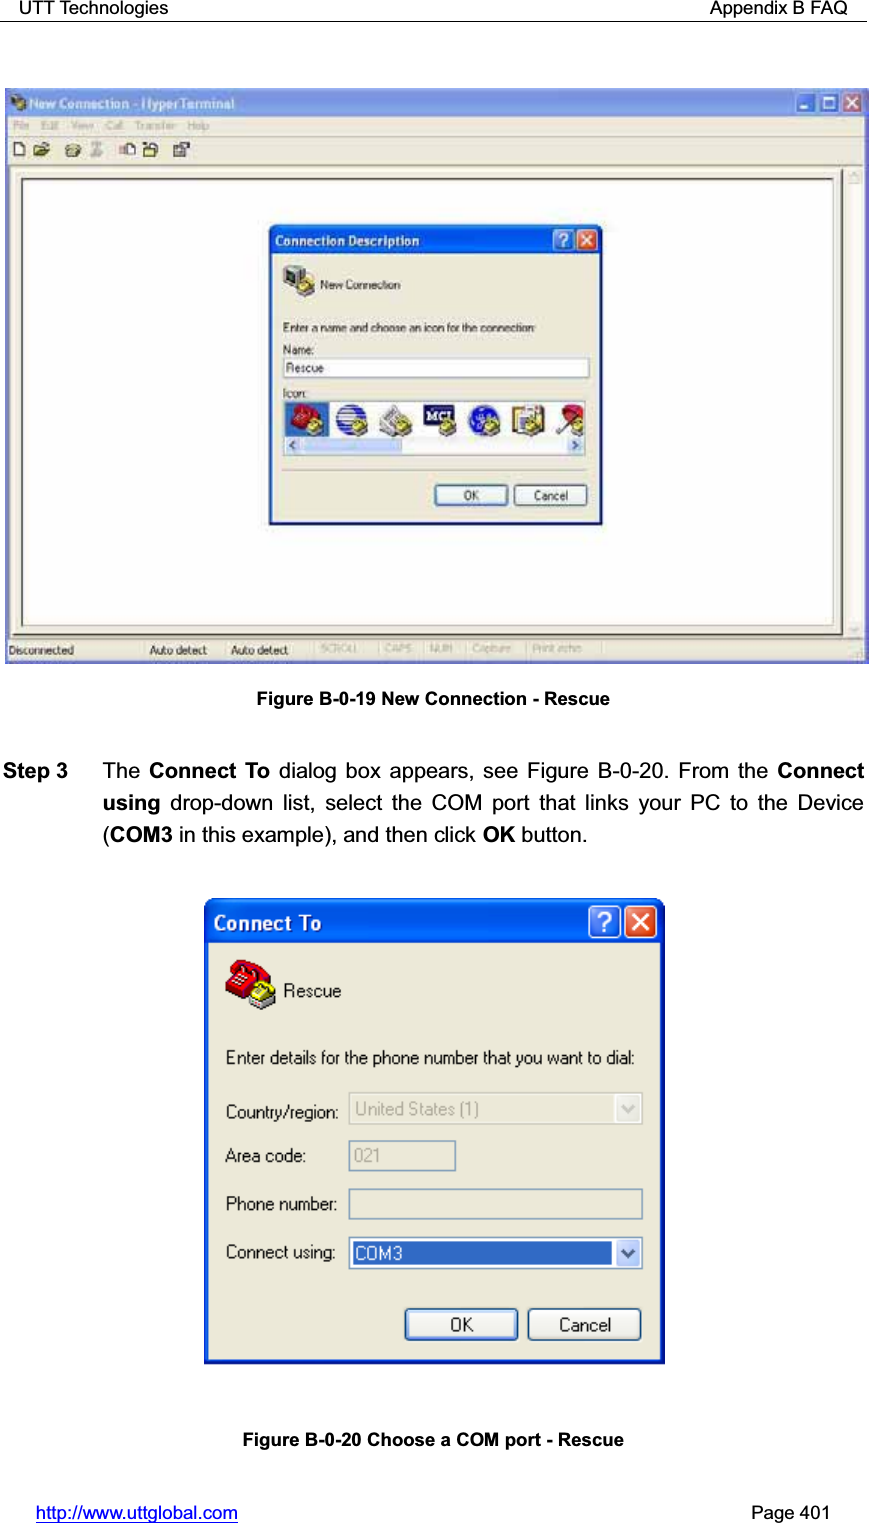 UTT Technologies                                                          Appendix B FAQ http://www.uttglobal.com                                                       Page 401 Figure B-0-19 New Connection - Rescue Step 3  The Connect To dialog box appears, see Figure B-0-20. From the Connect using drop-down list, select the COM port that links your PC to the Device (COM3 in this example), and then click OK button. Figure B-0-20 Choose a COM port - Rescue 